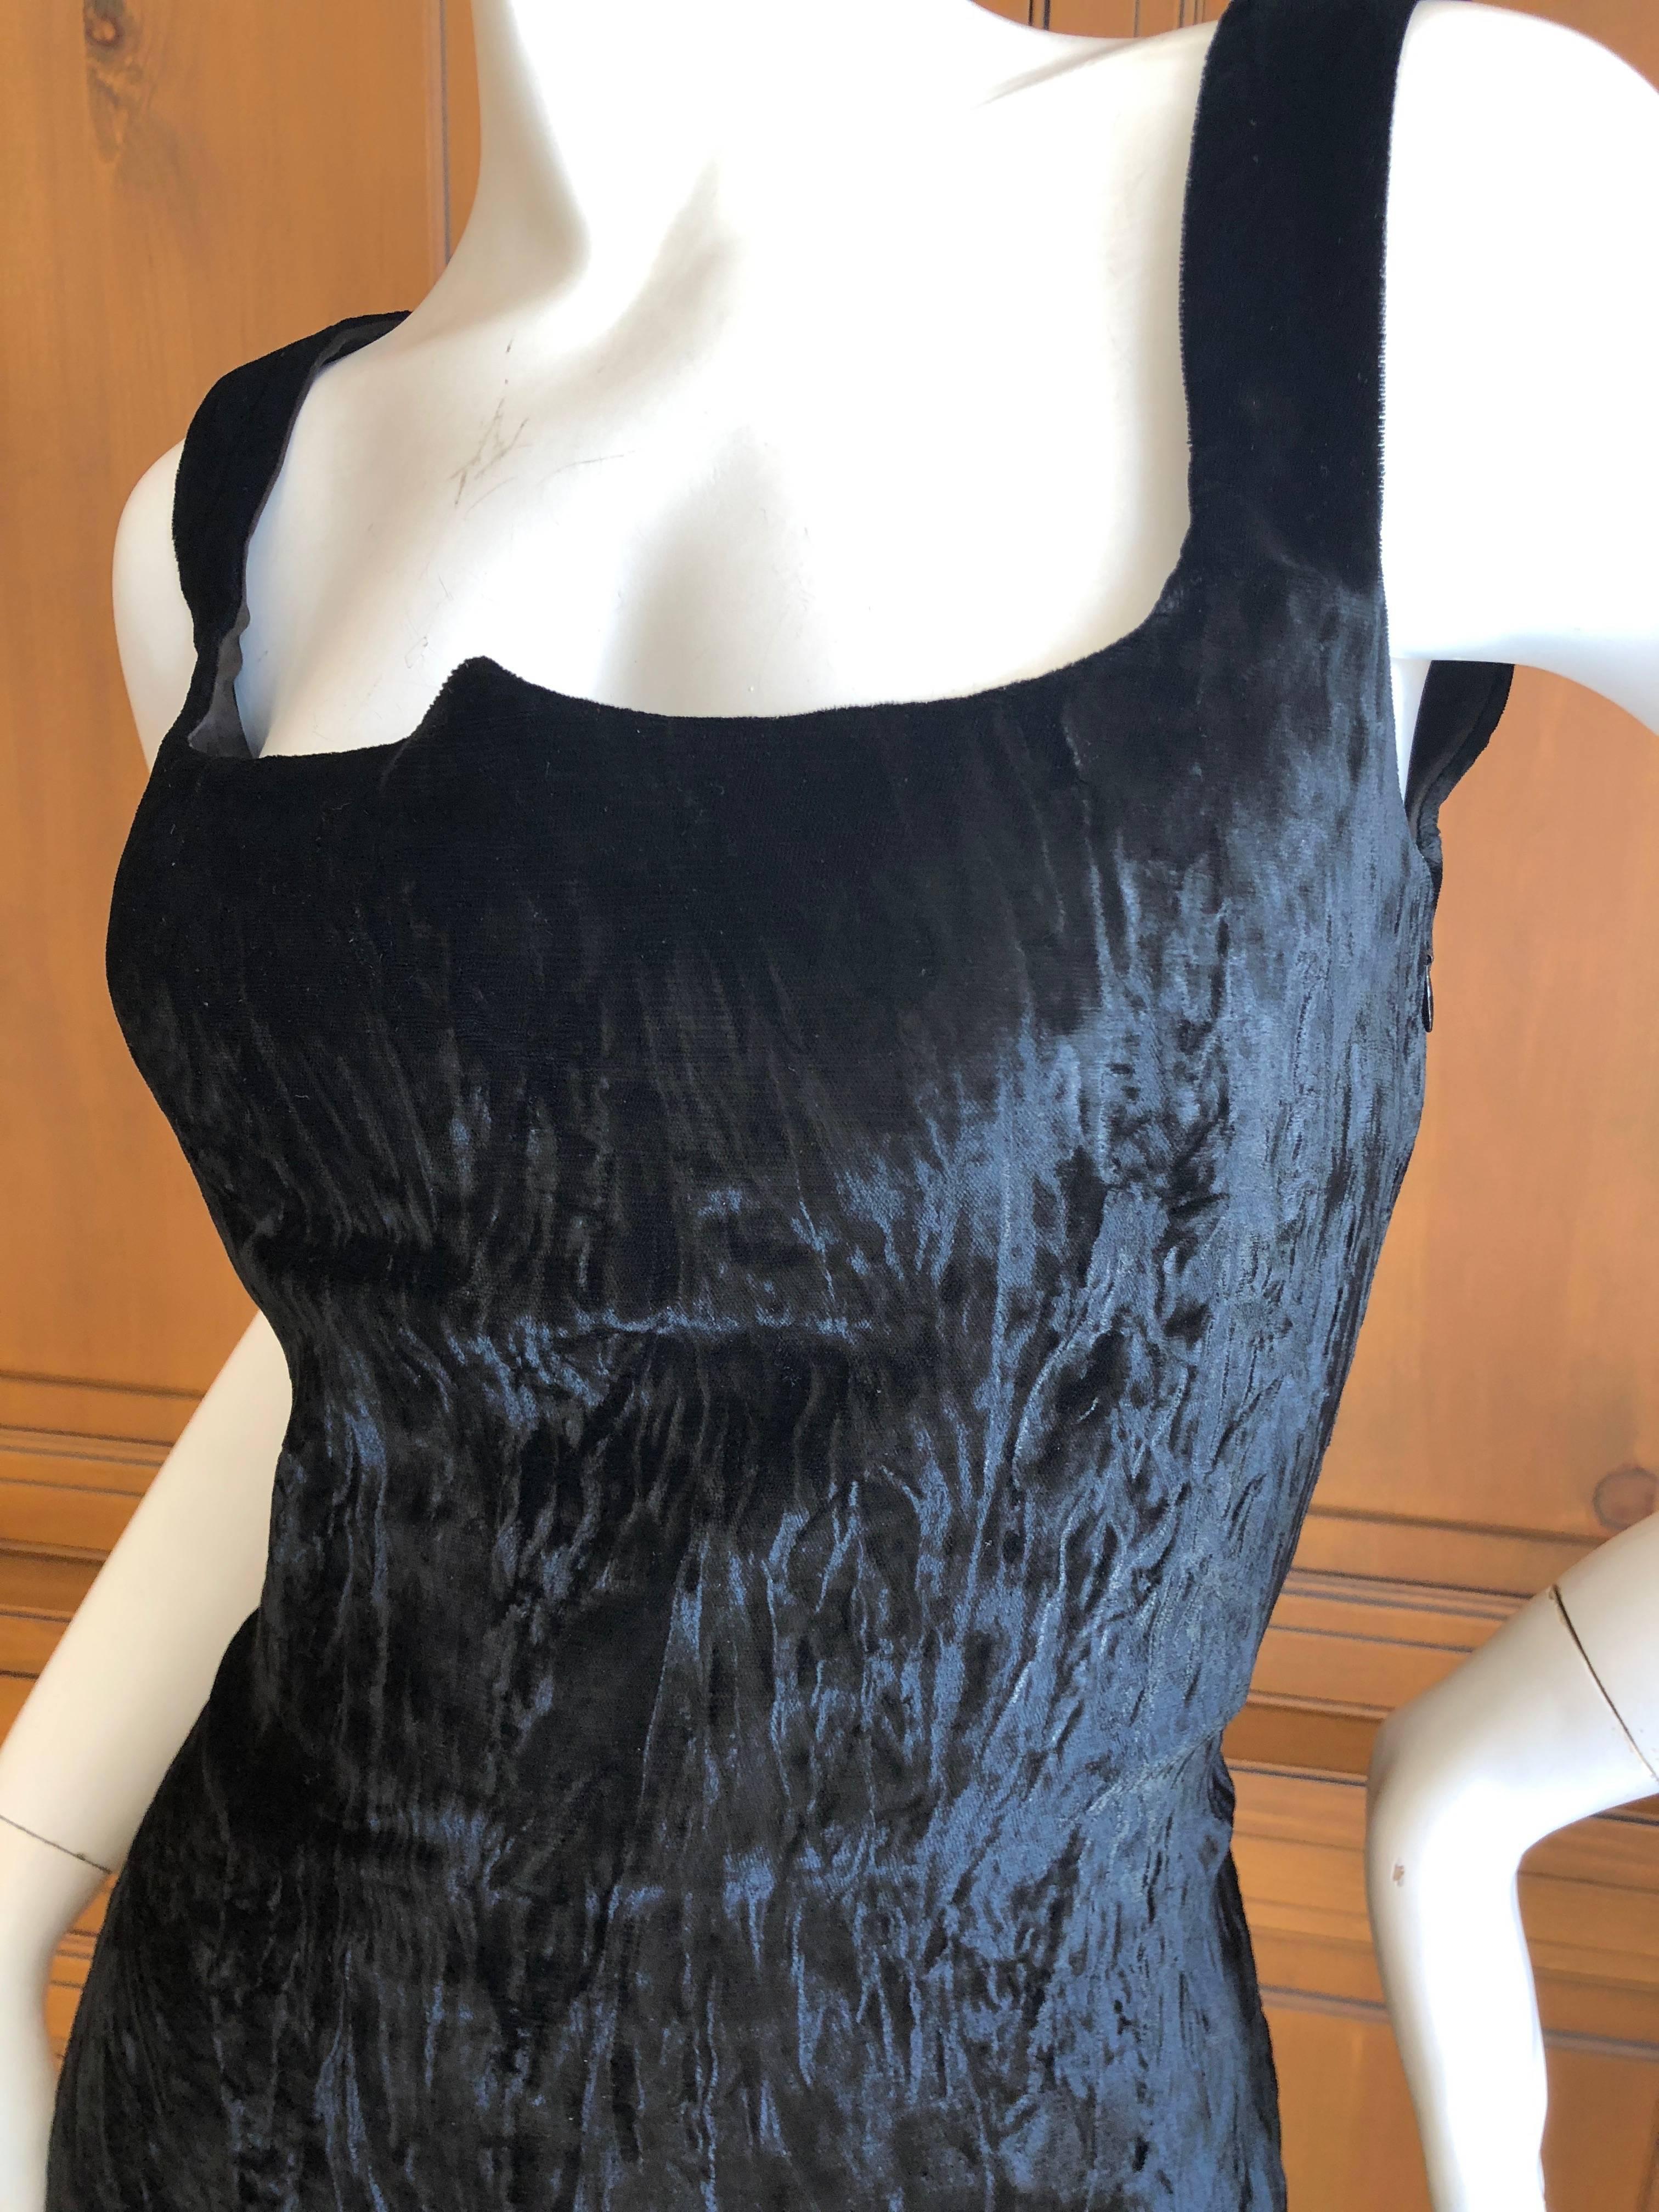 Gianni Versace Couture Vintage Textured Black Velvet  Evening Dress.
Sizzling hot, from 1989
Hard to photograph , this is much prettier in person.
It is marked size 42 but runs small. 
 Bust 38